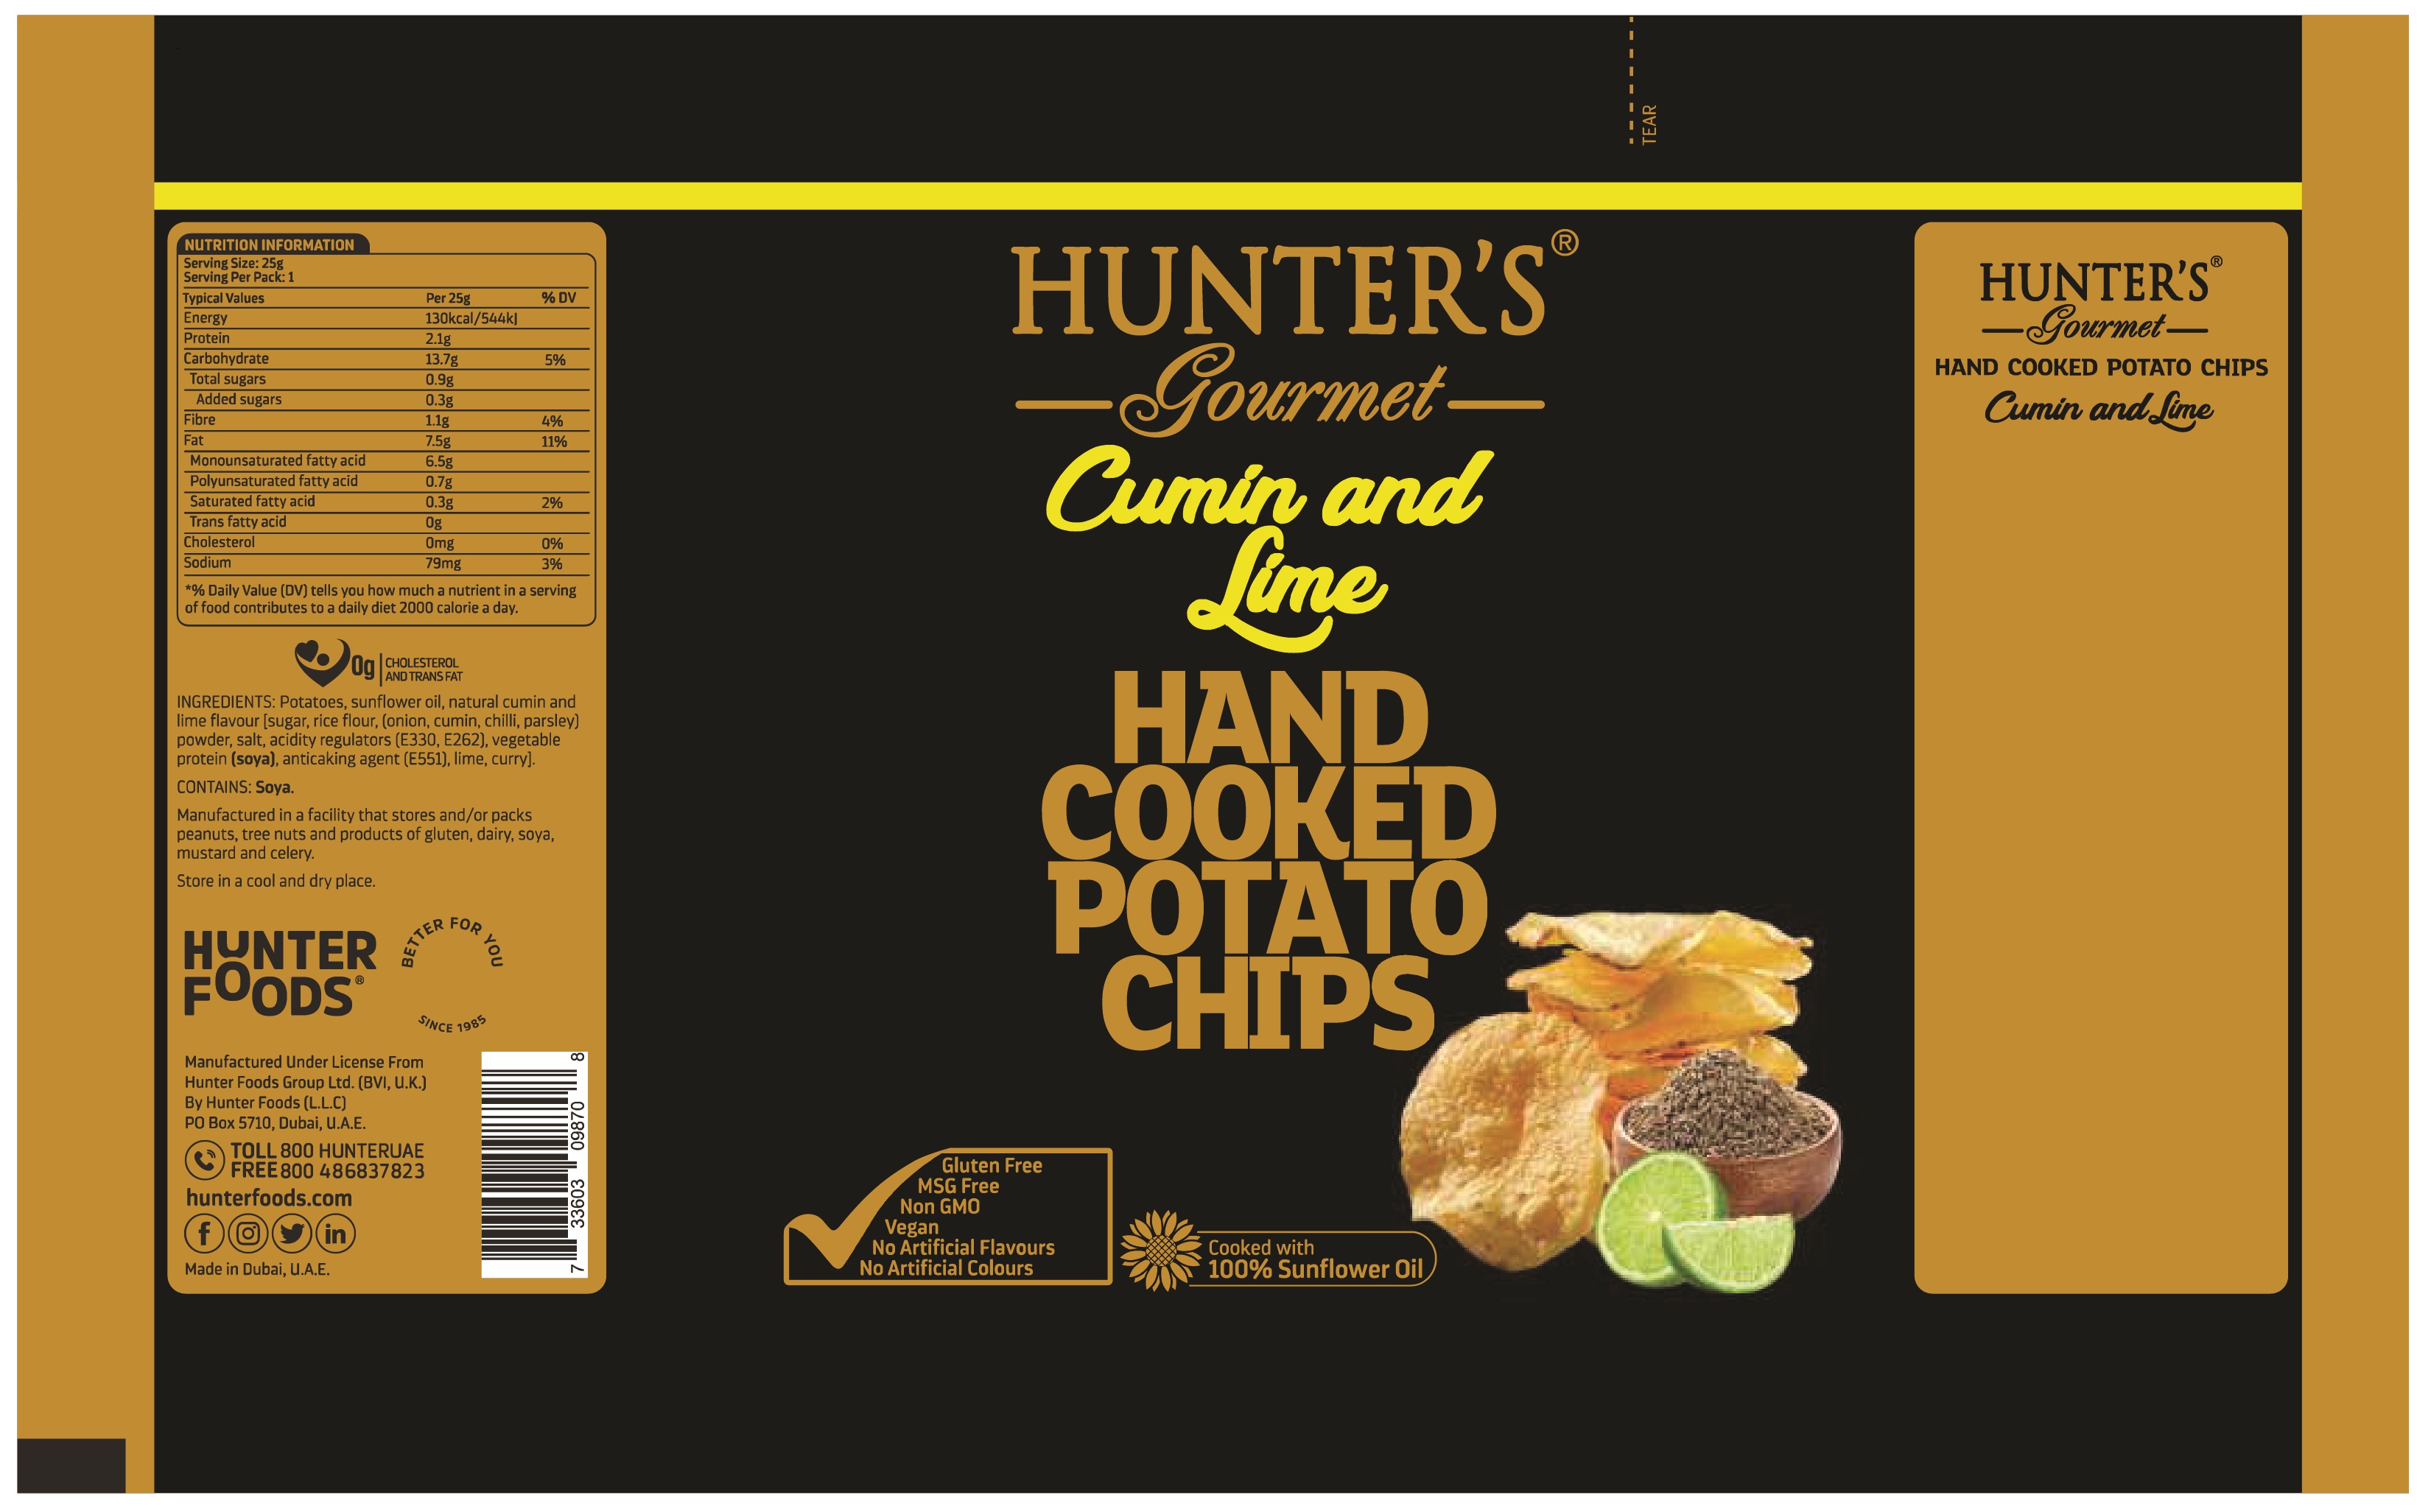 Hunter's Gourmet Hand Cooked Potato Chips Cumin and Lime 50 units per case 25 g Product Label